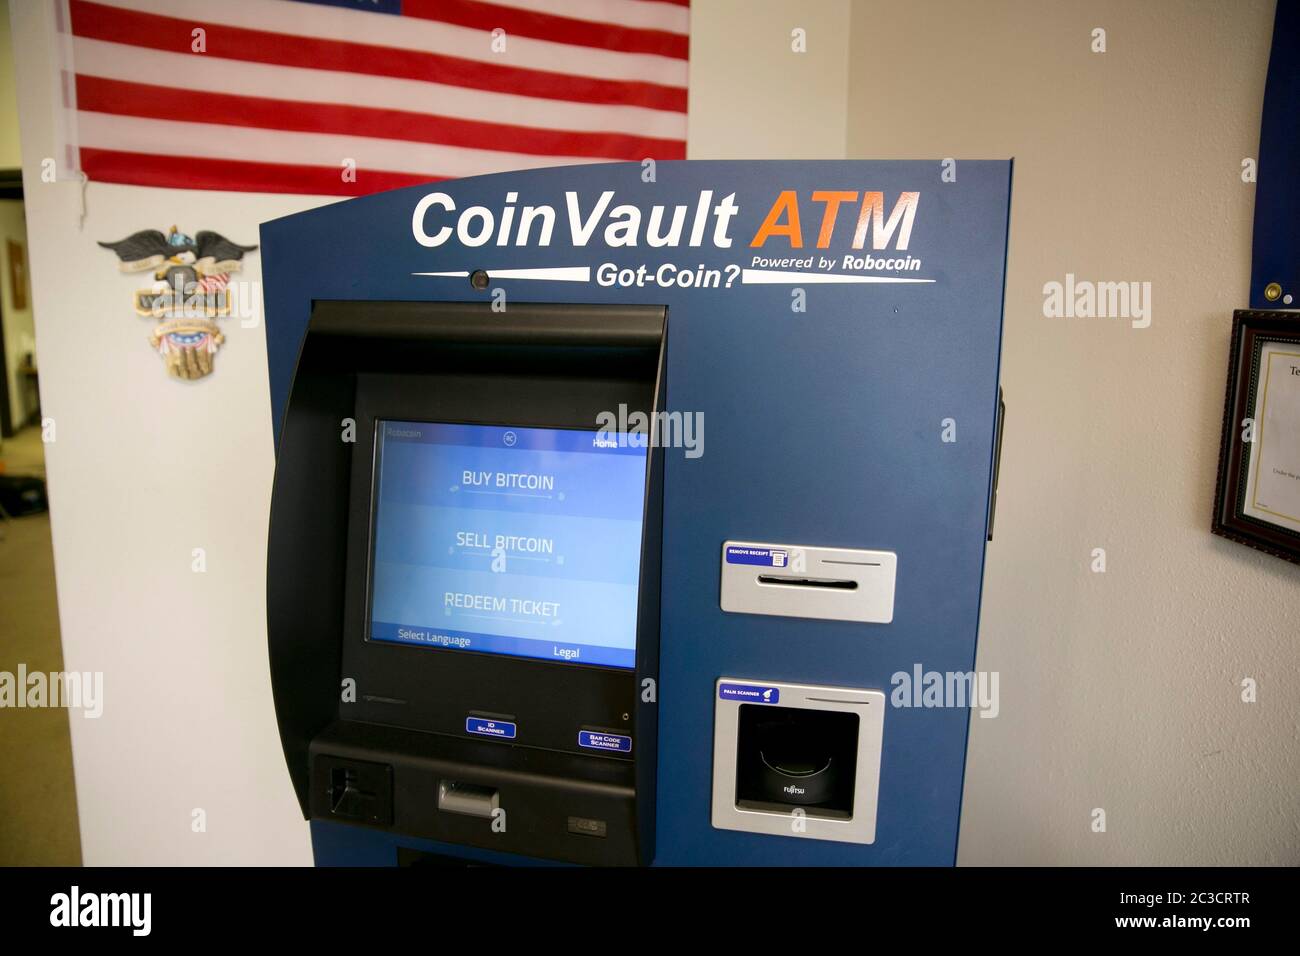 Austin Texas USA, March 5, 2014:  Bitcoin ATM machine located inside Central Texas Gun Works. Bitcoin was  launched in 2009 and is a decentralized digital currency that is traded mostly online and person to person rather than through banks. The Austin ATM is the first of its kind in the USA to dispense cash.   ©Marjorie Kamys Cotera/Daemmrich Photography Stock Photo